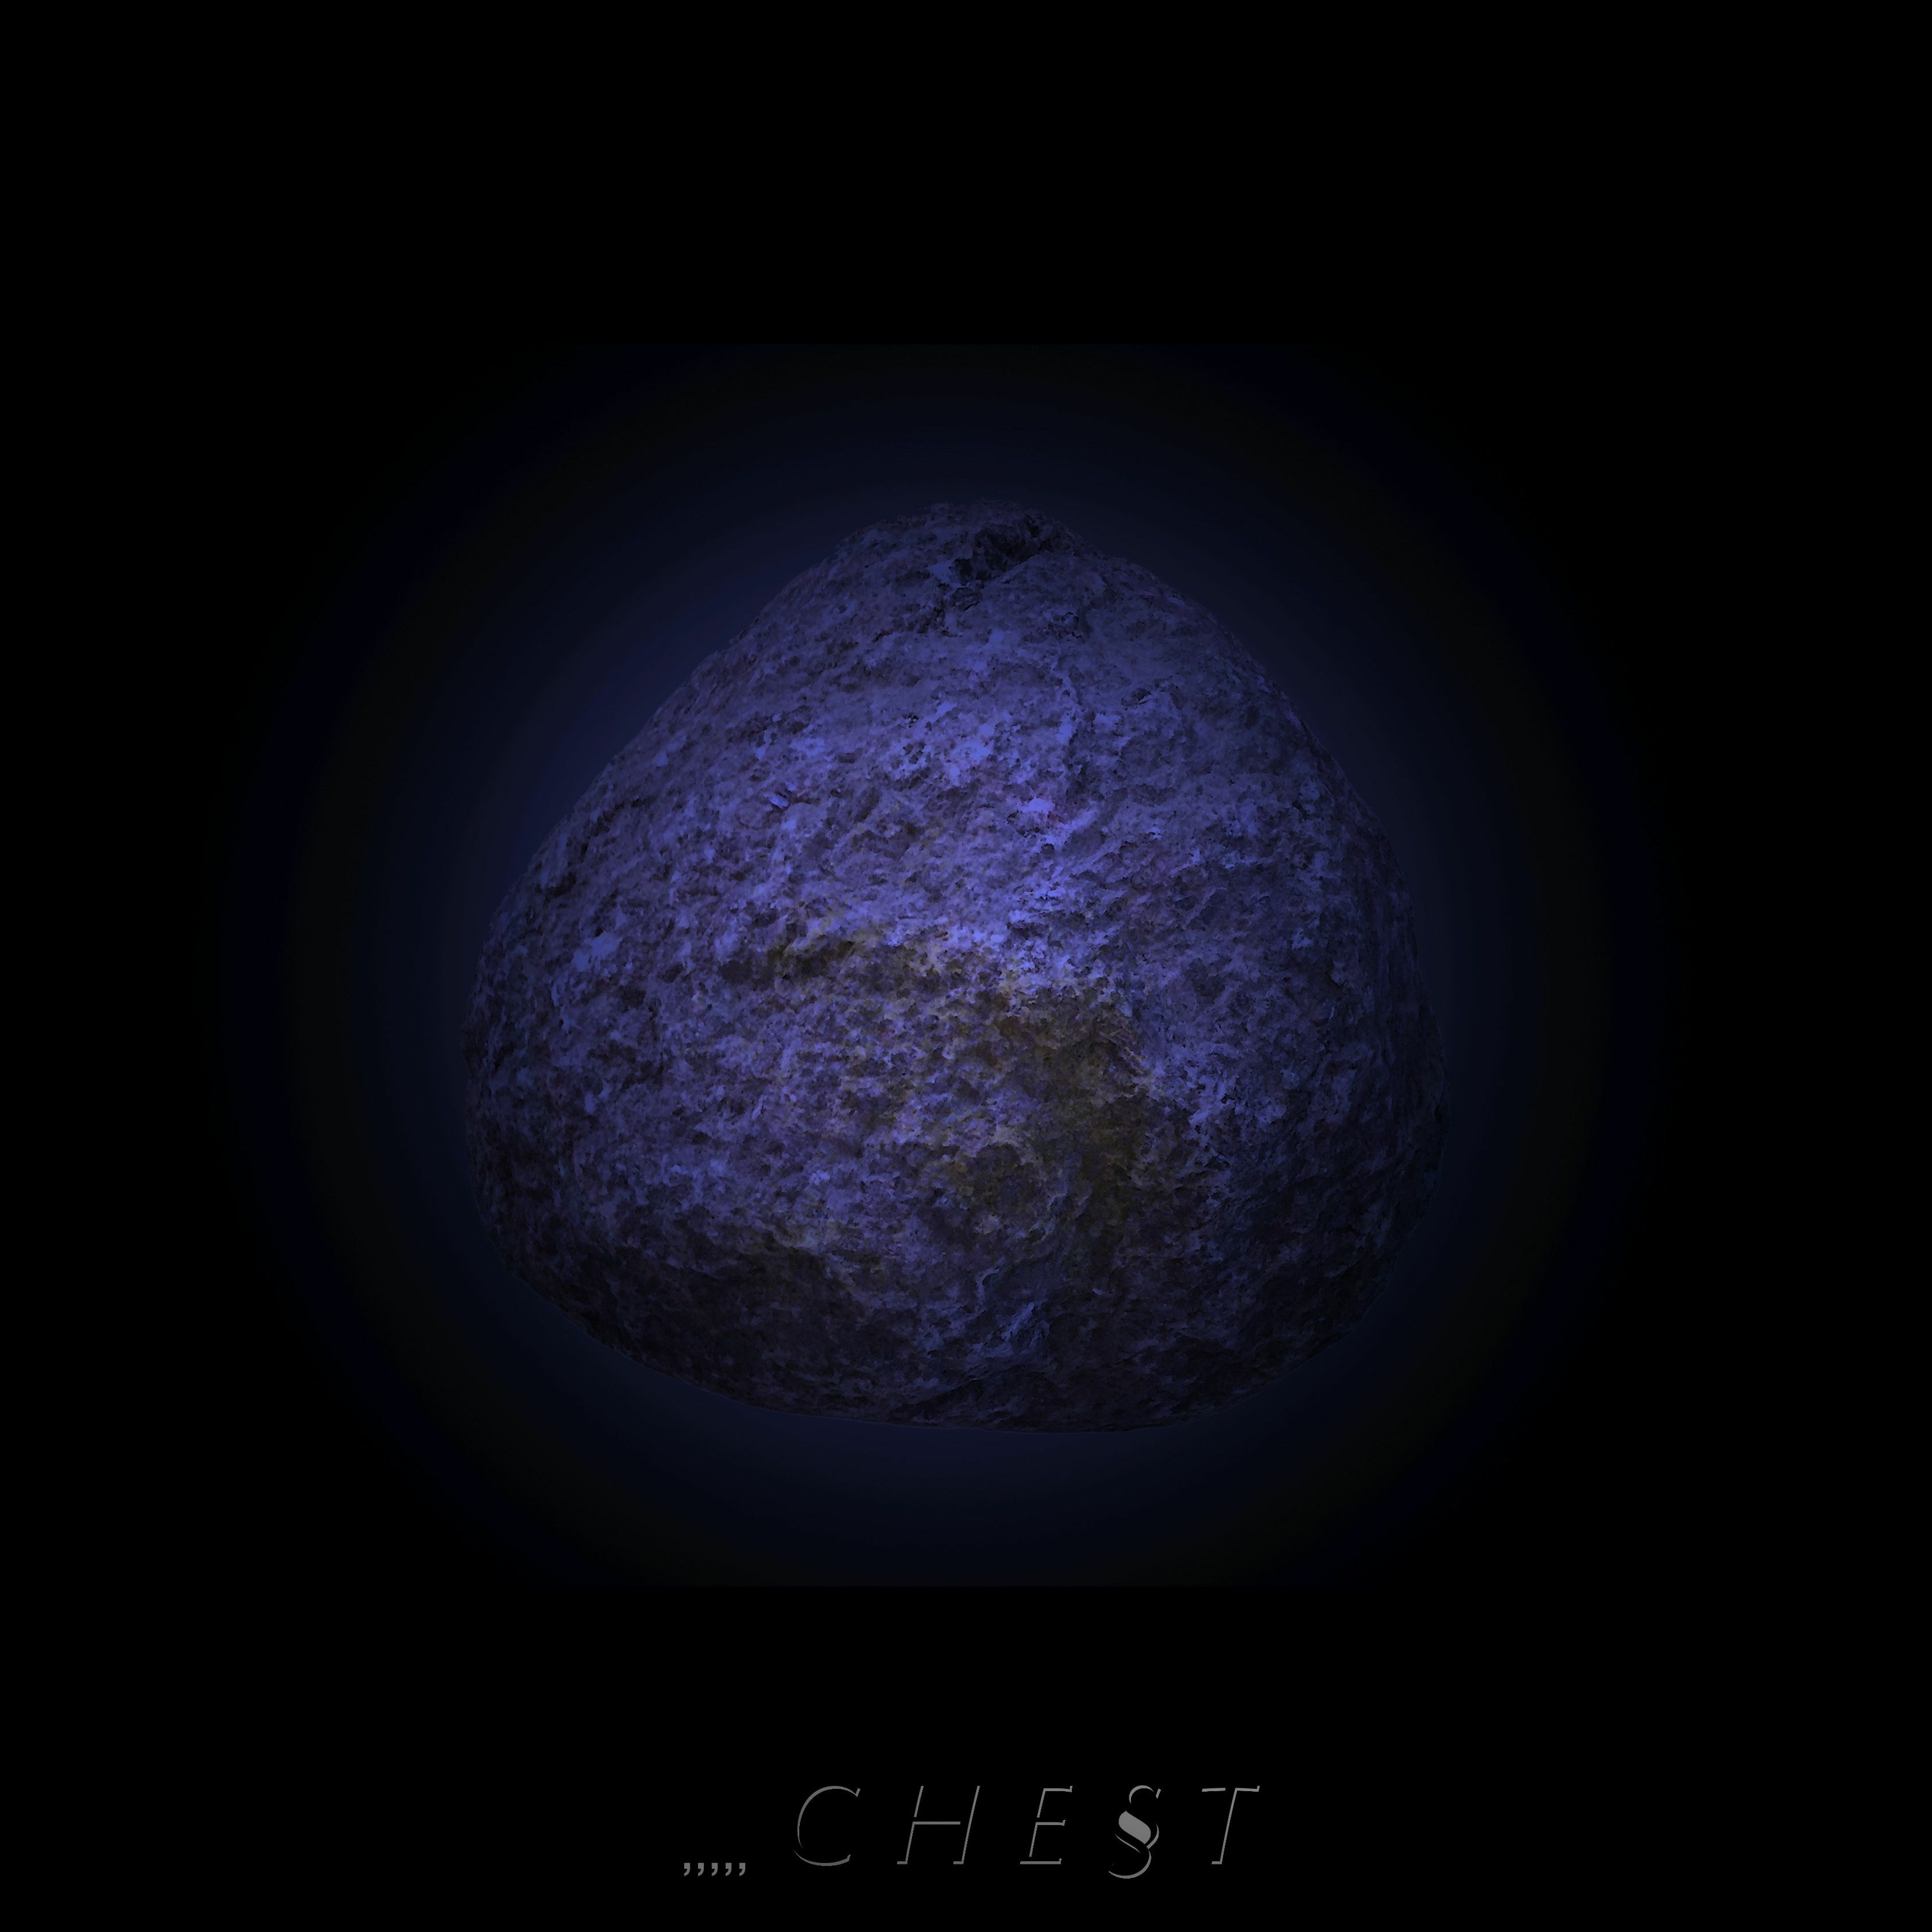 chest 51 ,,,,, Belonging is a riddle